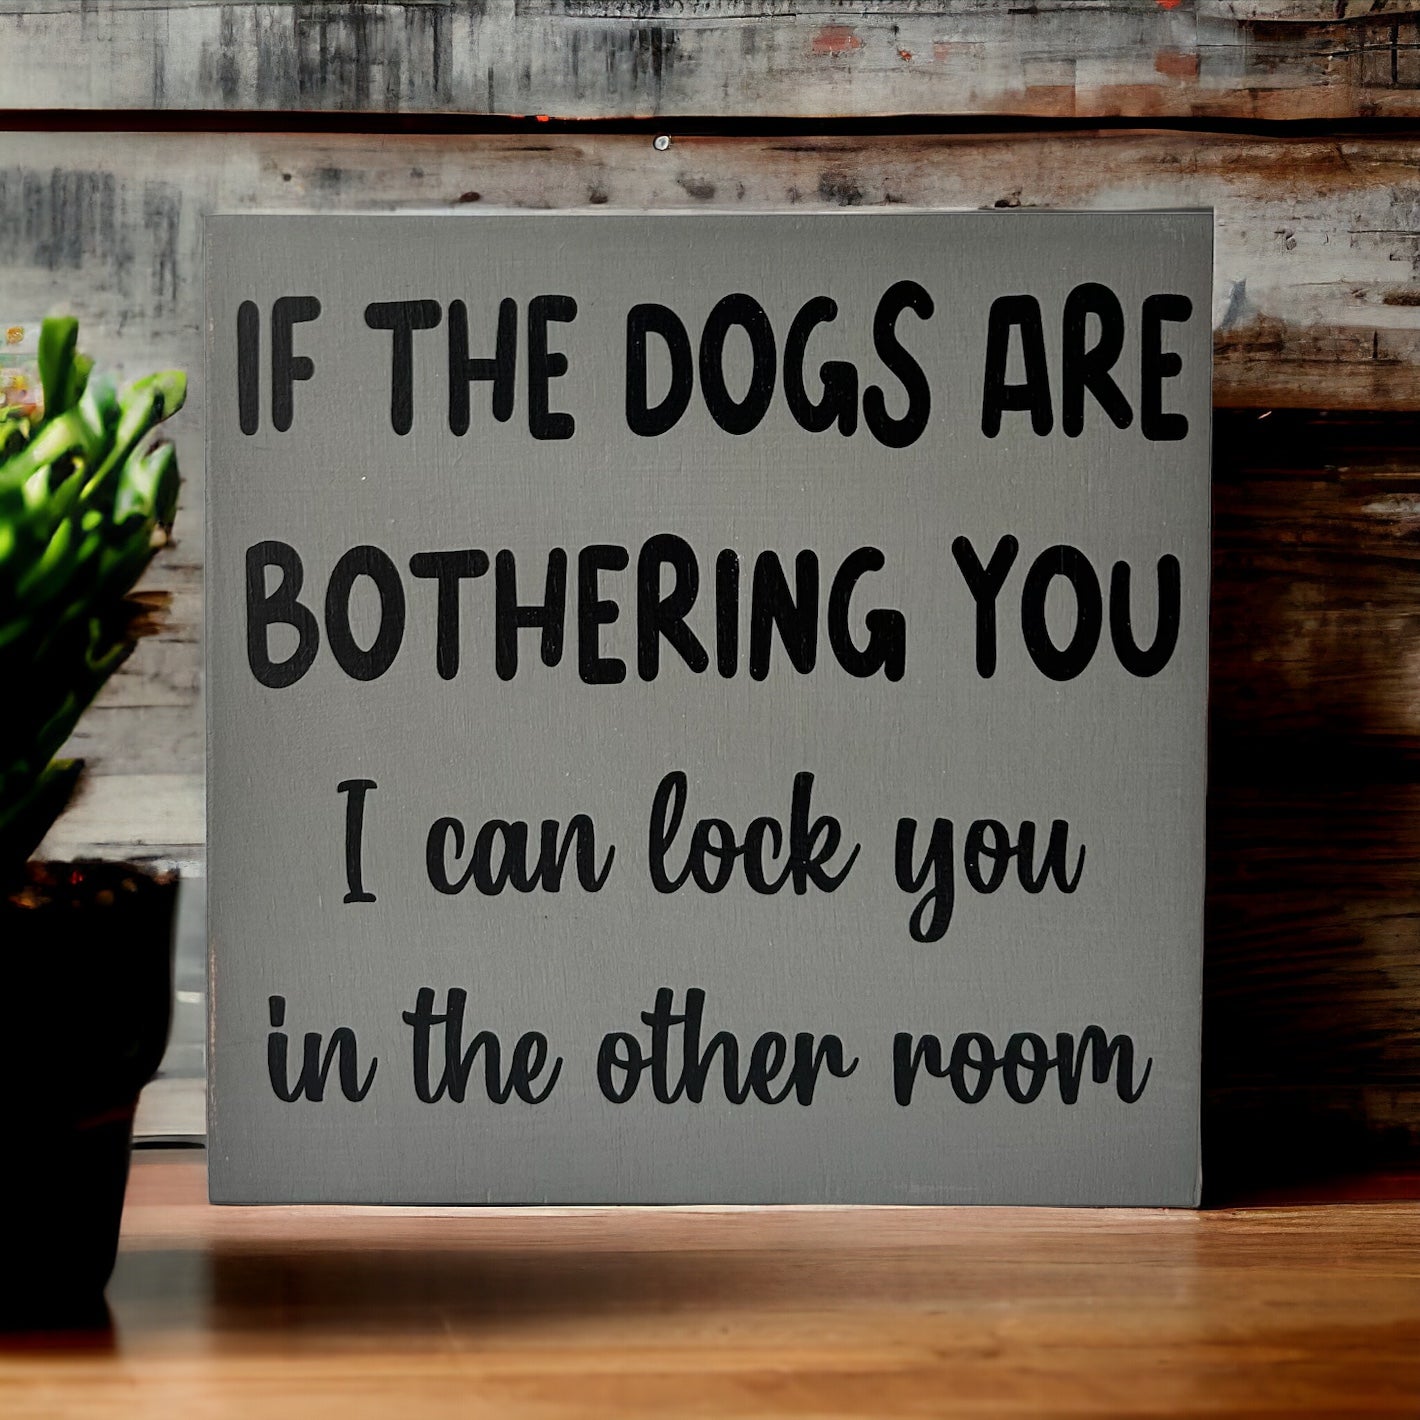 Dogs are Bothering You - Funny Rustic Wood Sign